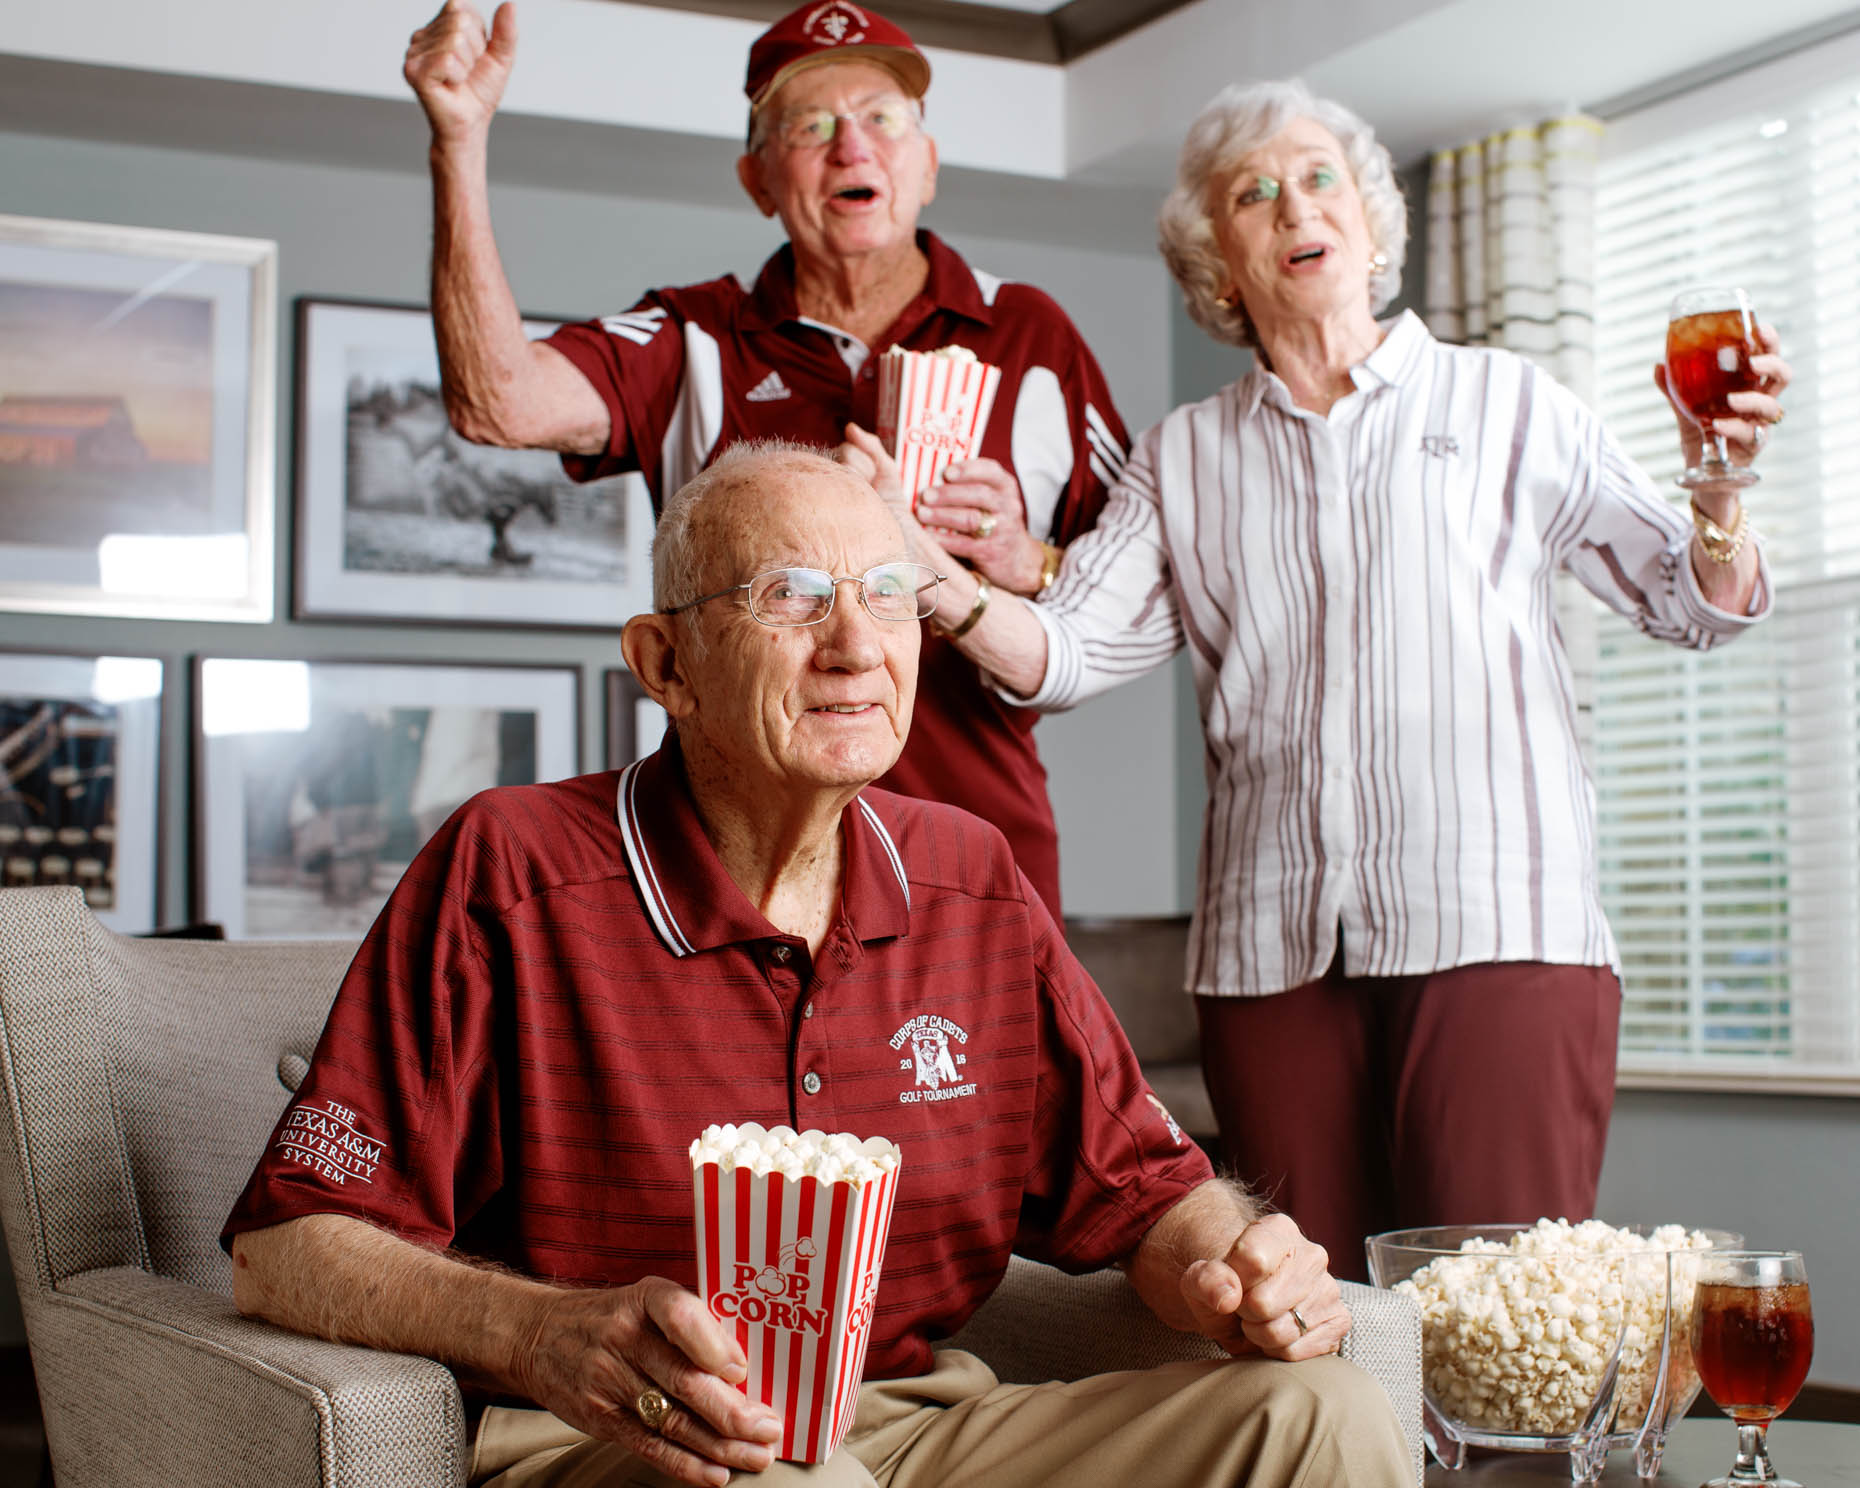 Retirees watching Aggie football game at a senior living community